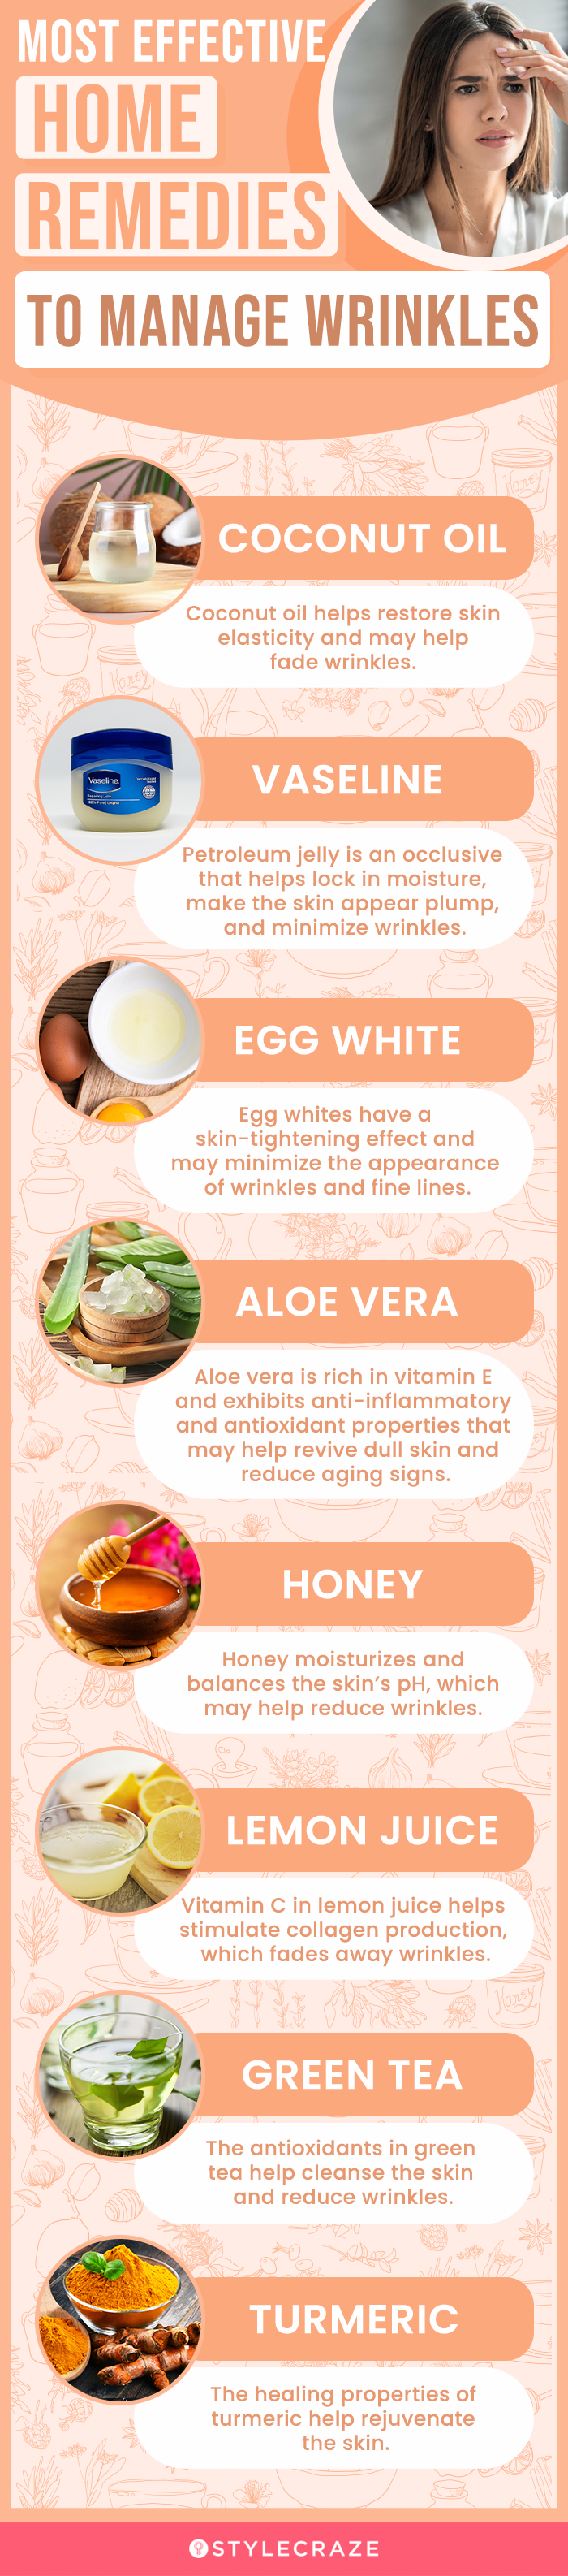 most effective home remedies to manage wrinkles [infographic]